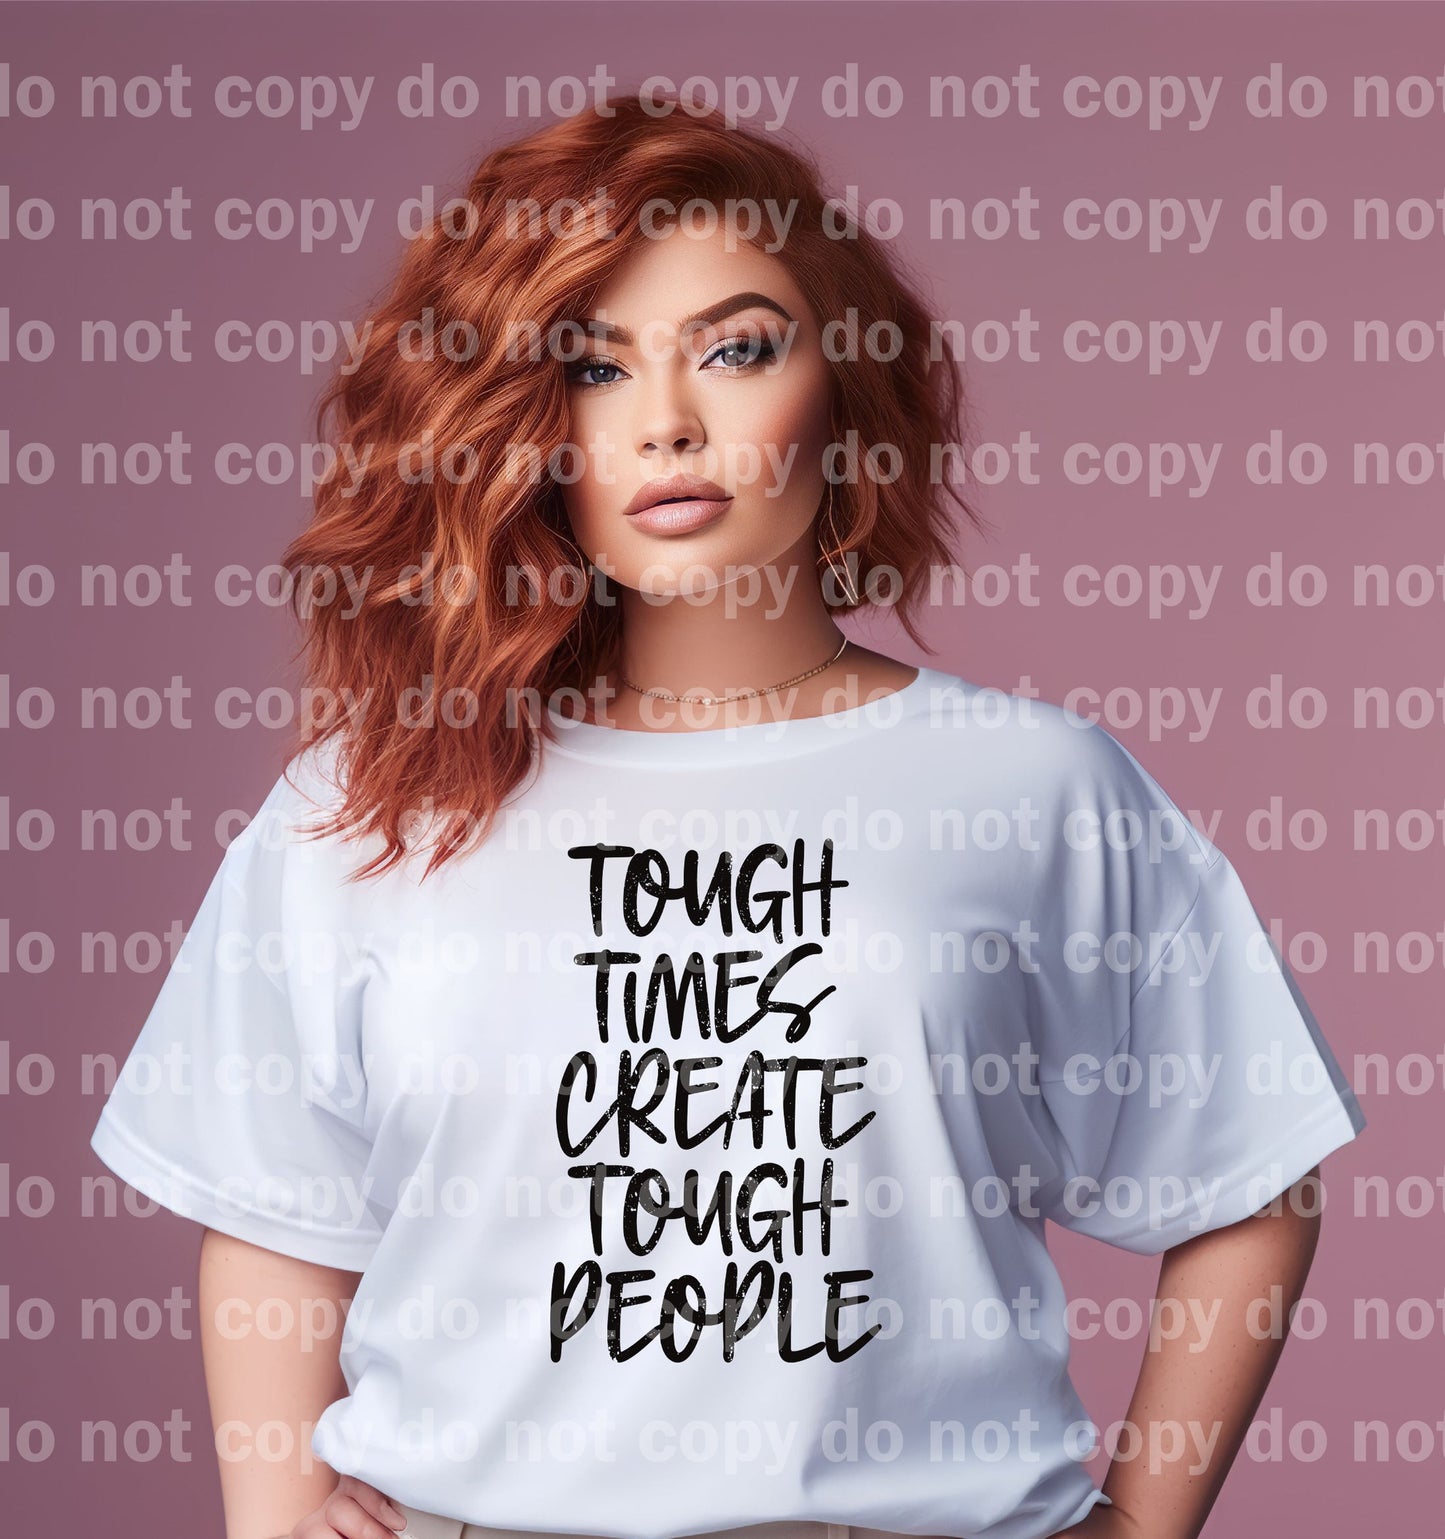 Tough Times Create Tough People Distressed/Non Distressed Dream Print or Sublimation Print